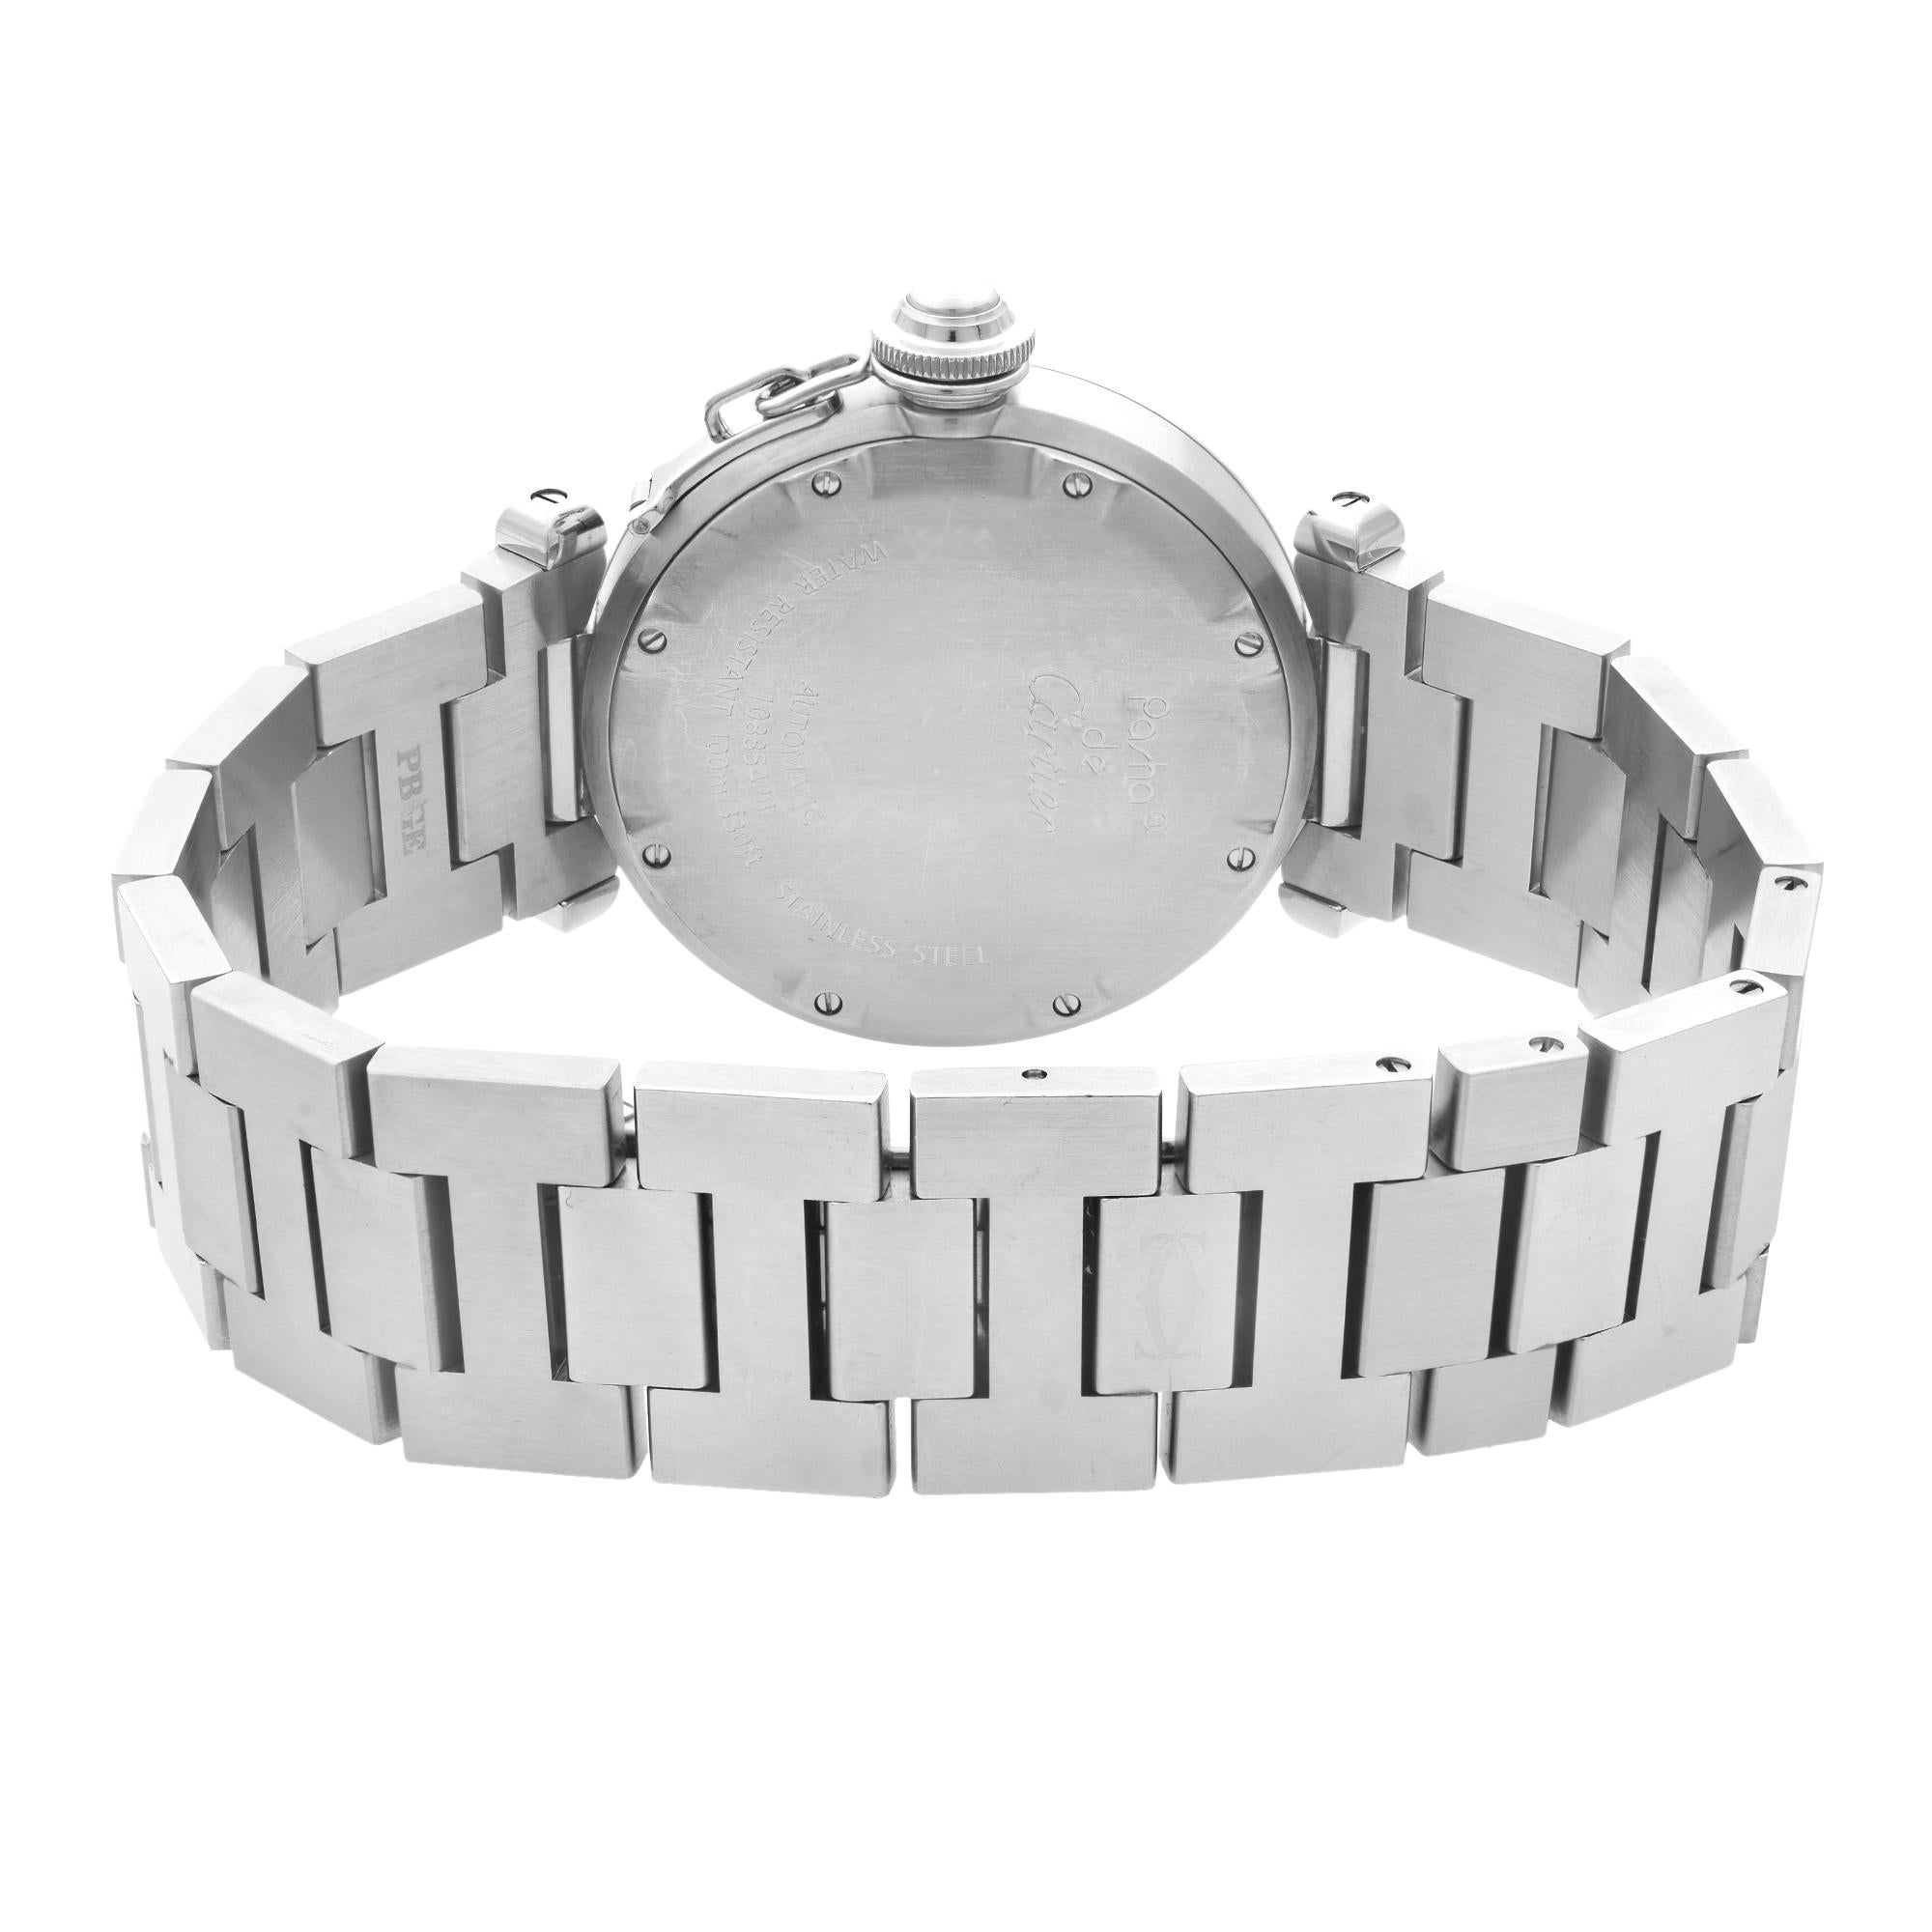 Cartier Pasha Stainless Steel White Dial Automatic Unisex Watch W31044M7 3